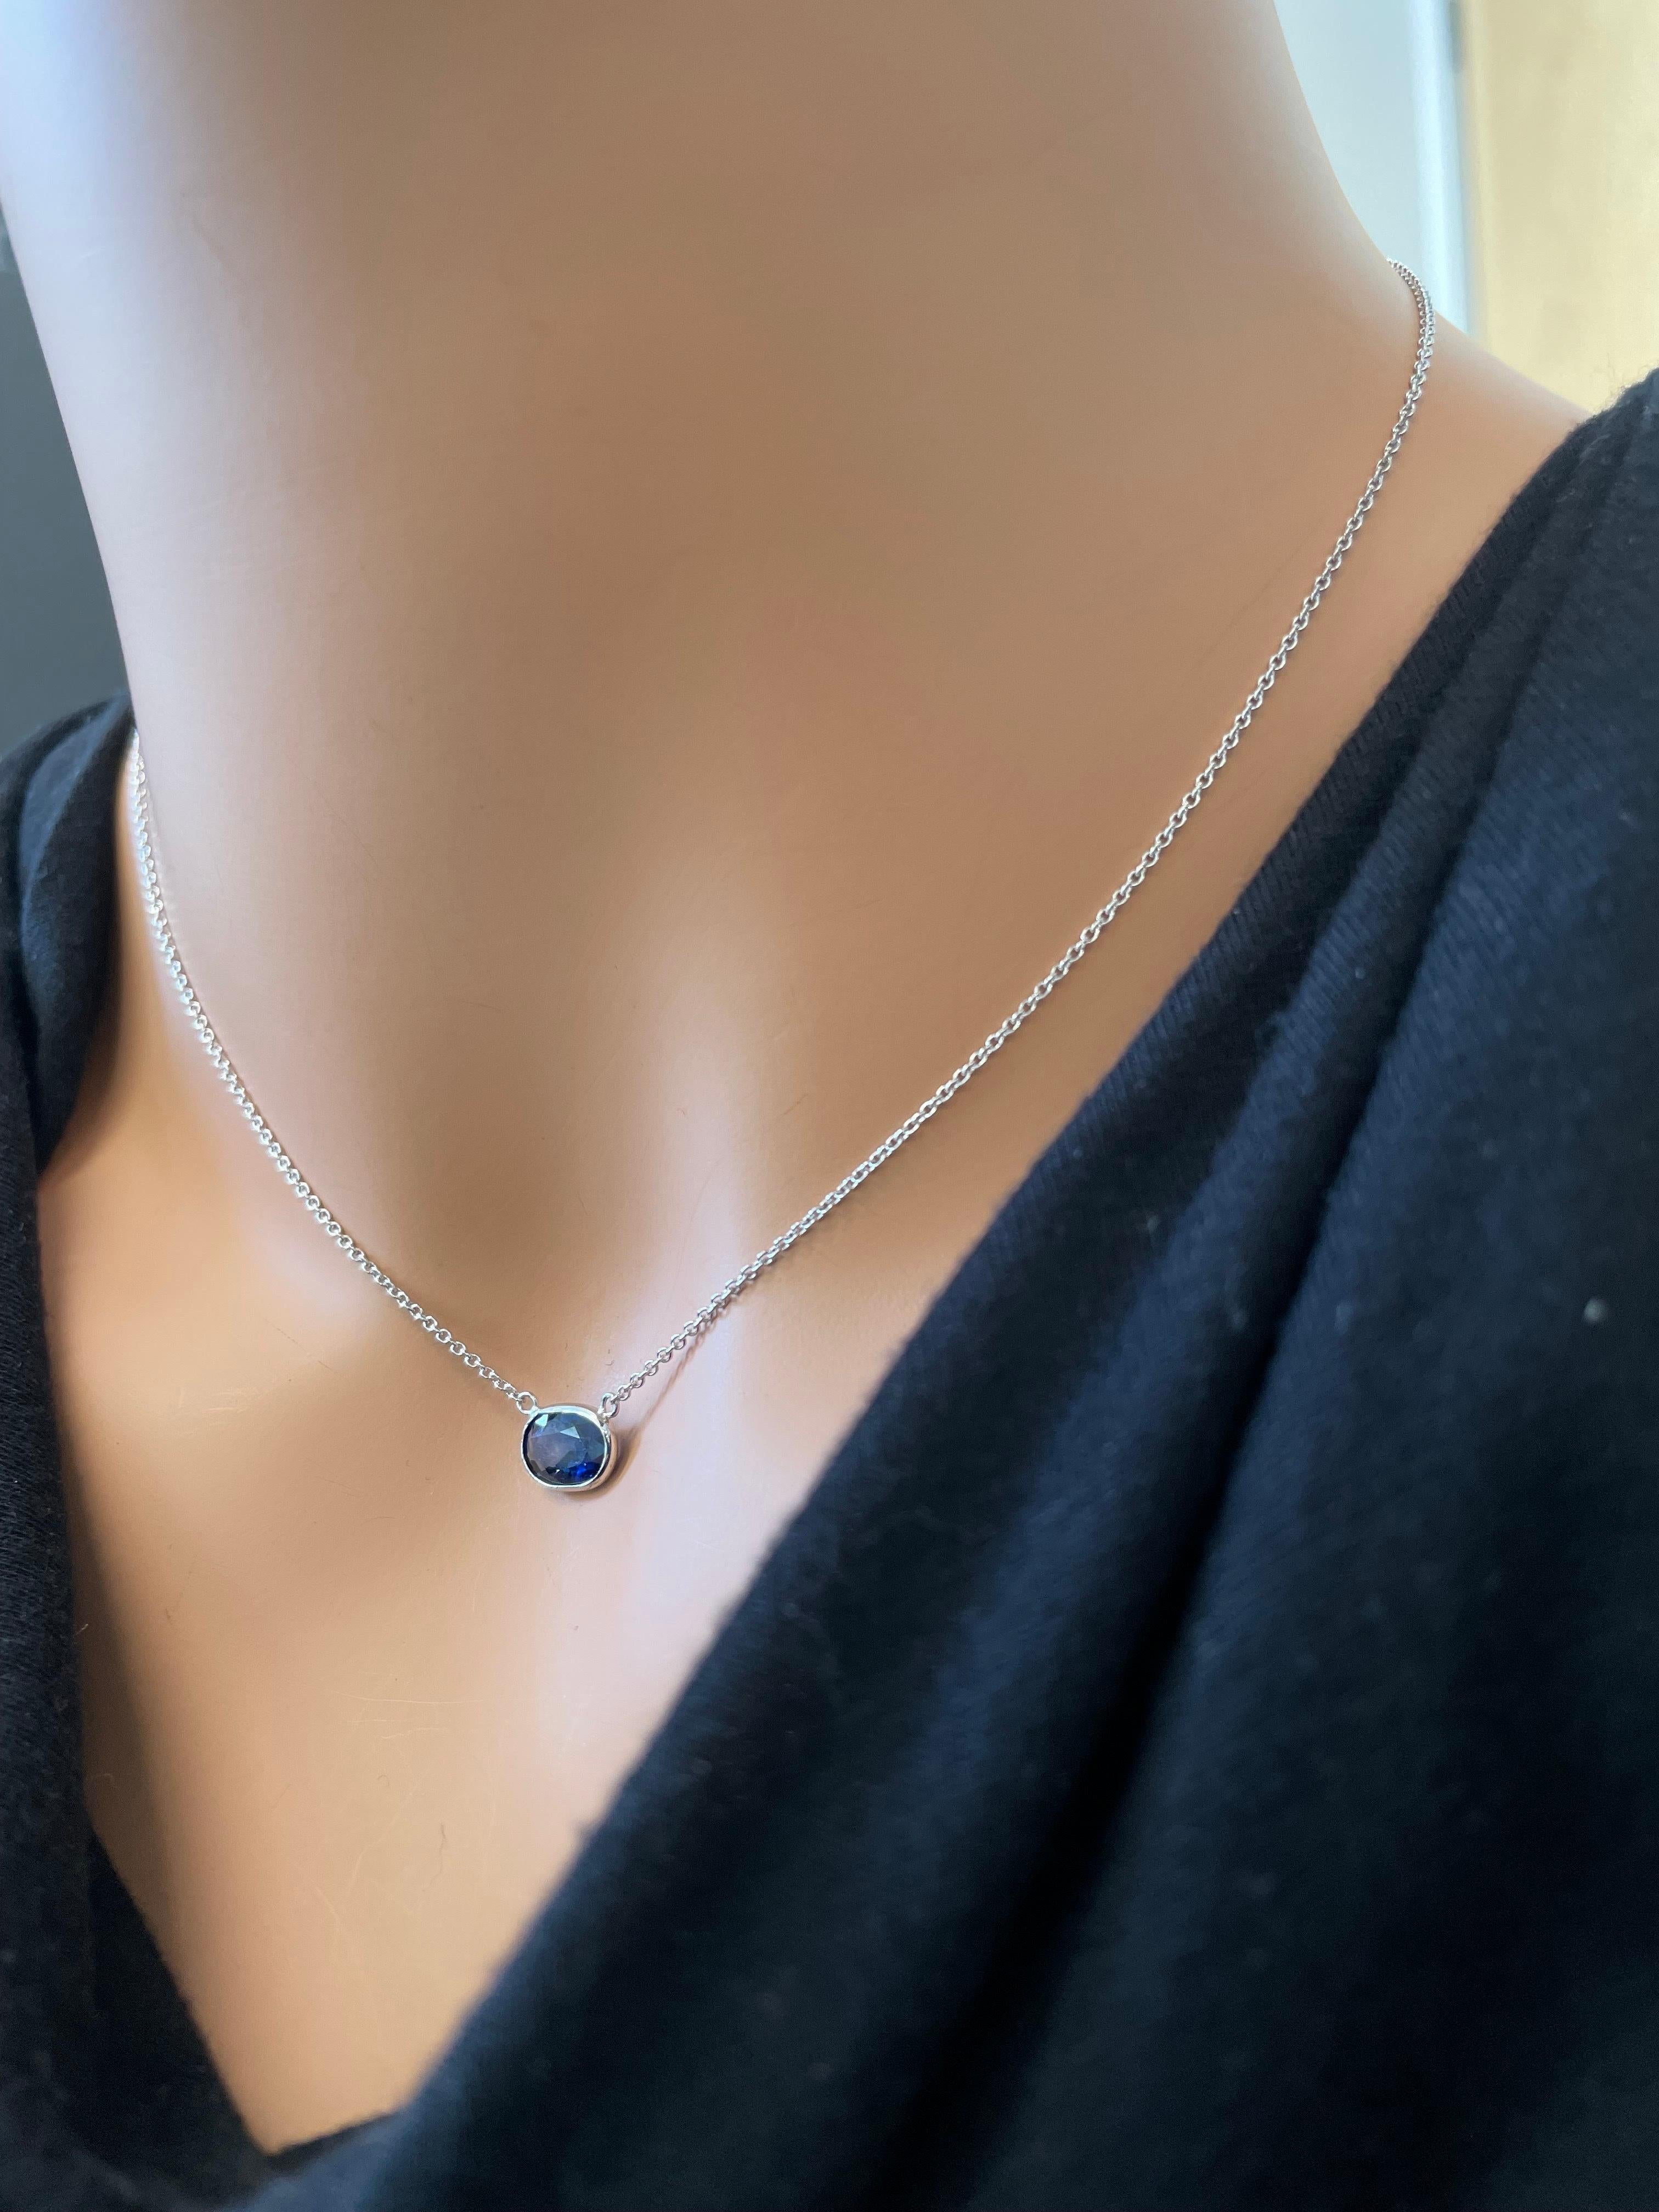 This necklace features an oval-cut blue sapphire with a weight of 1.97 carats, set in 14k white gold (WG). Blue sapphires are renowned for their deep, rich blue color, and the oval cut is a classic choice for gemstones, providing a timeless and